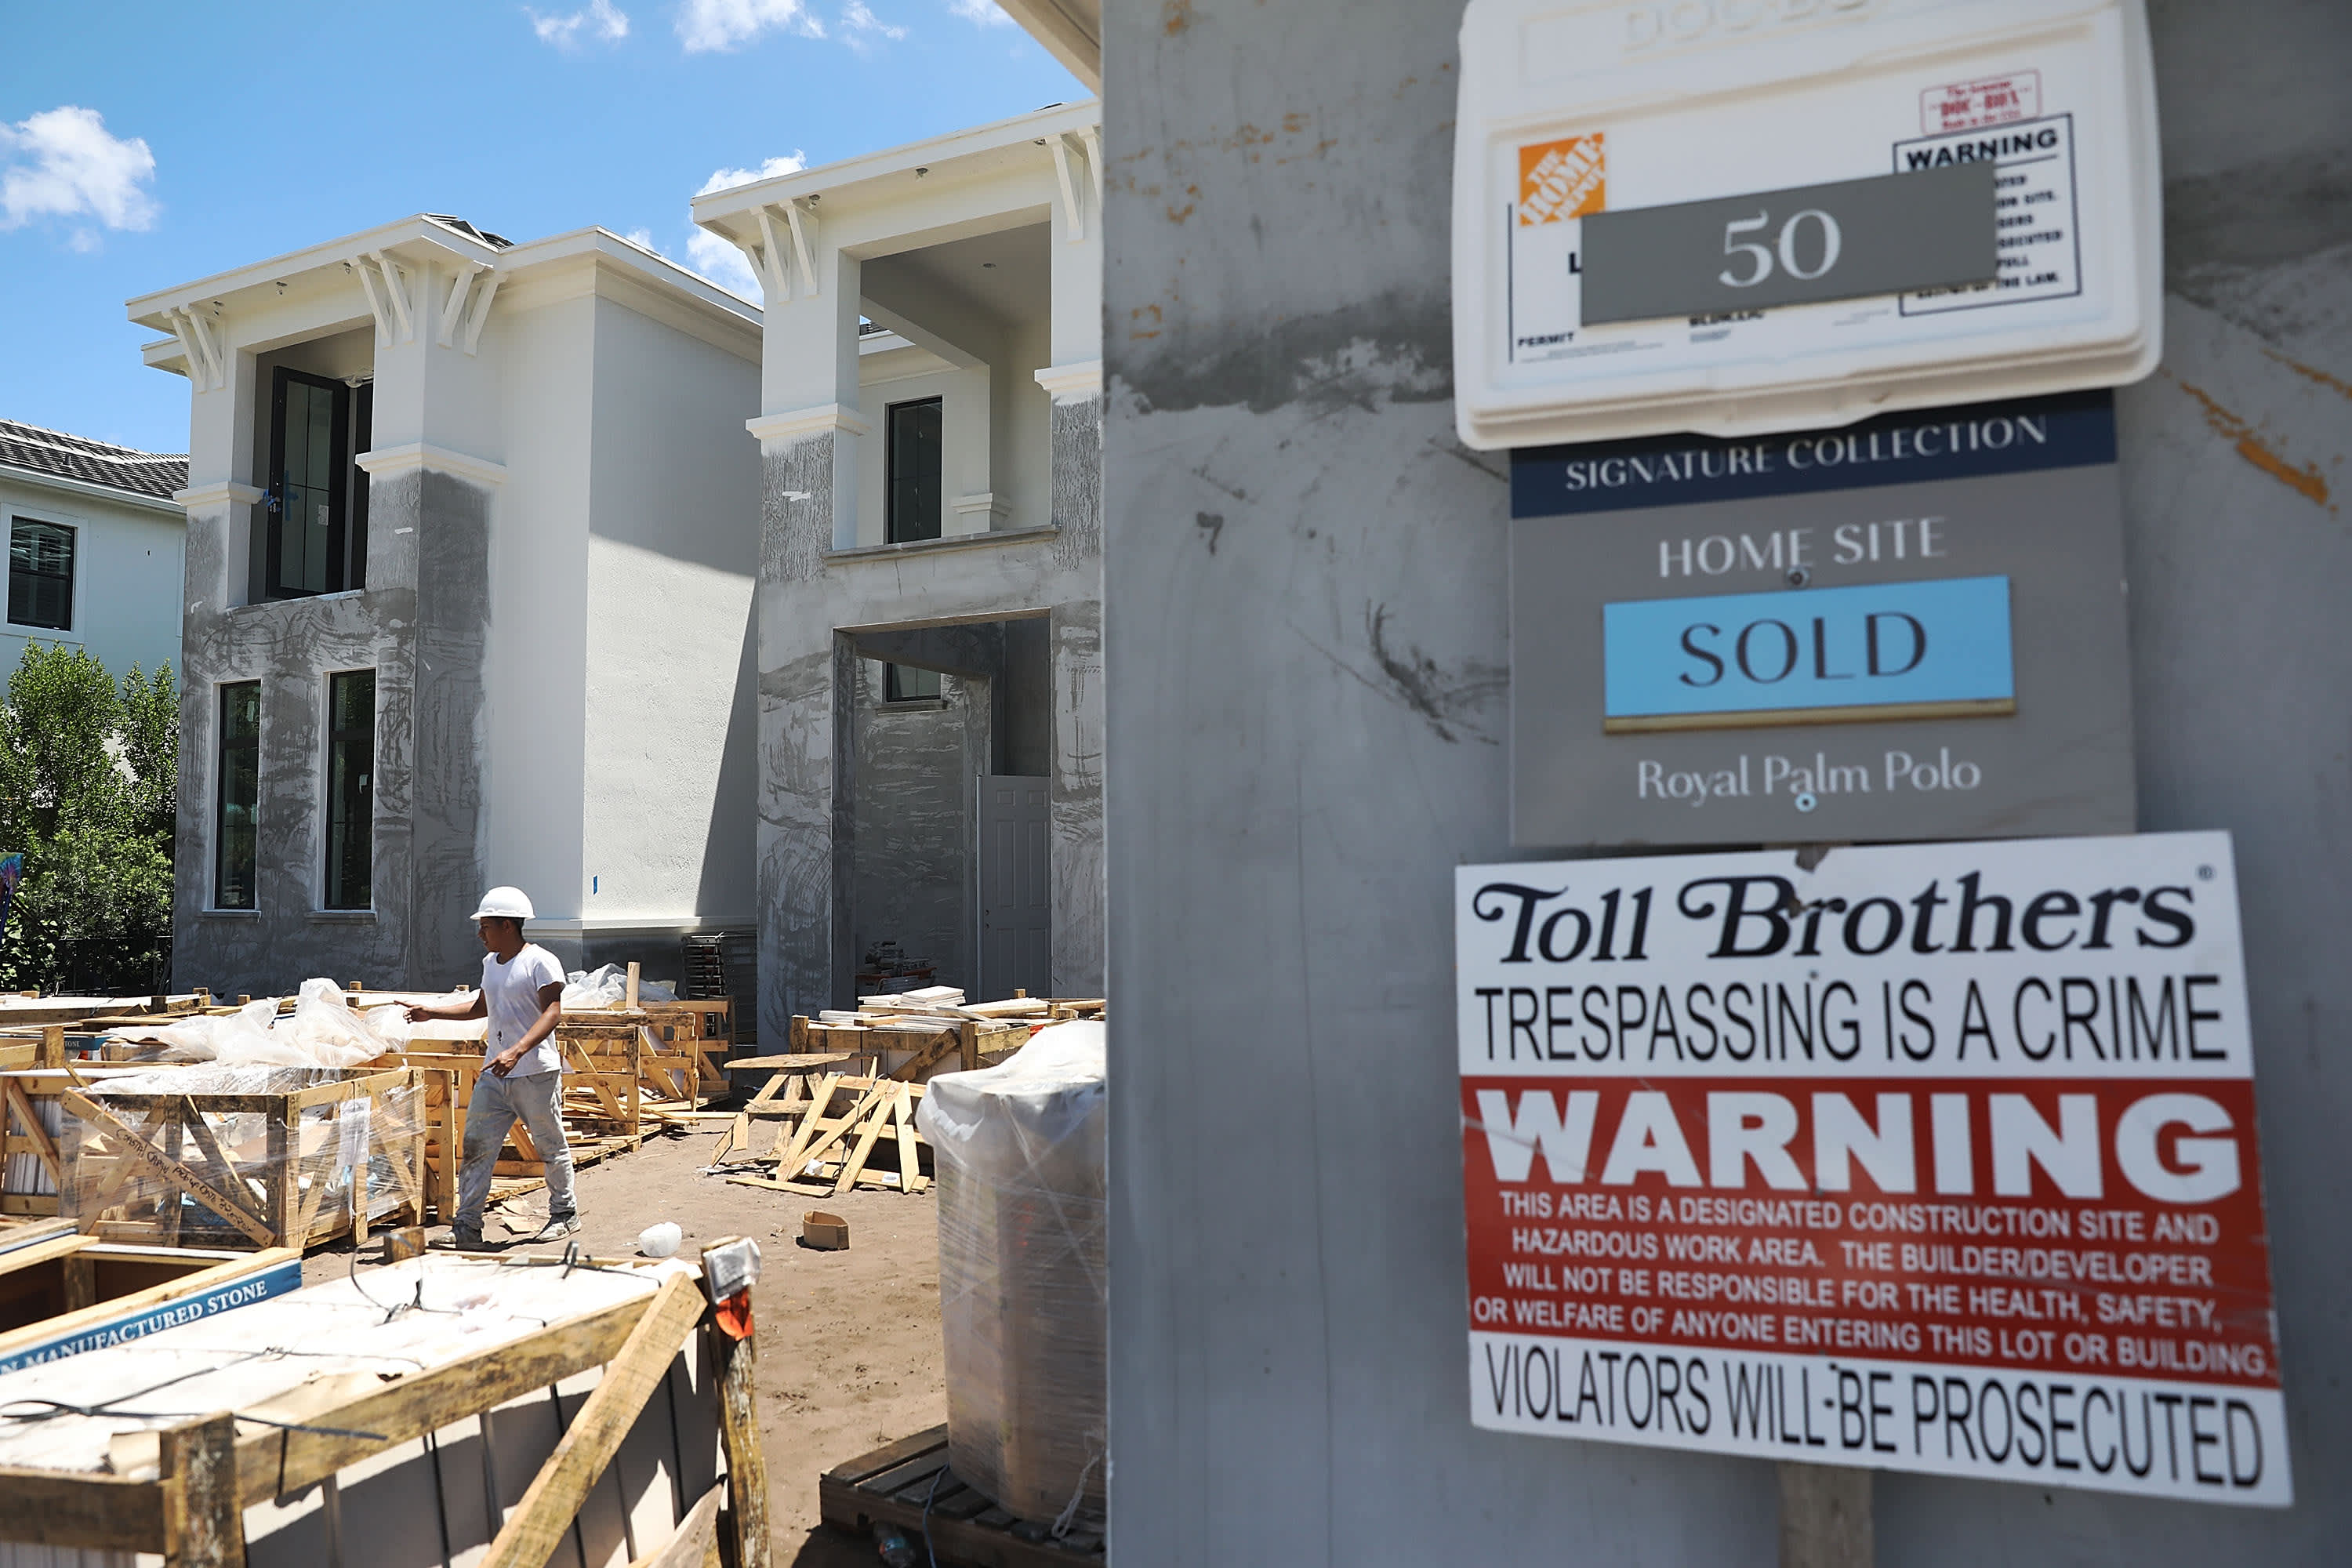 Toll Brothers' stock is cheap relative to its homebuilding peers, JPMorgan says in upgrade